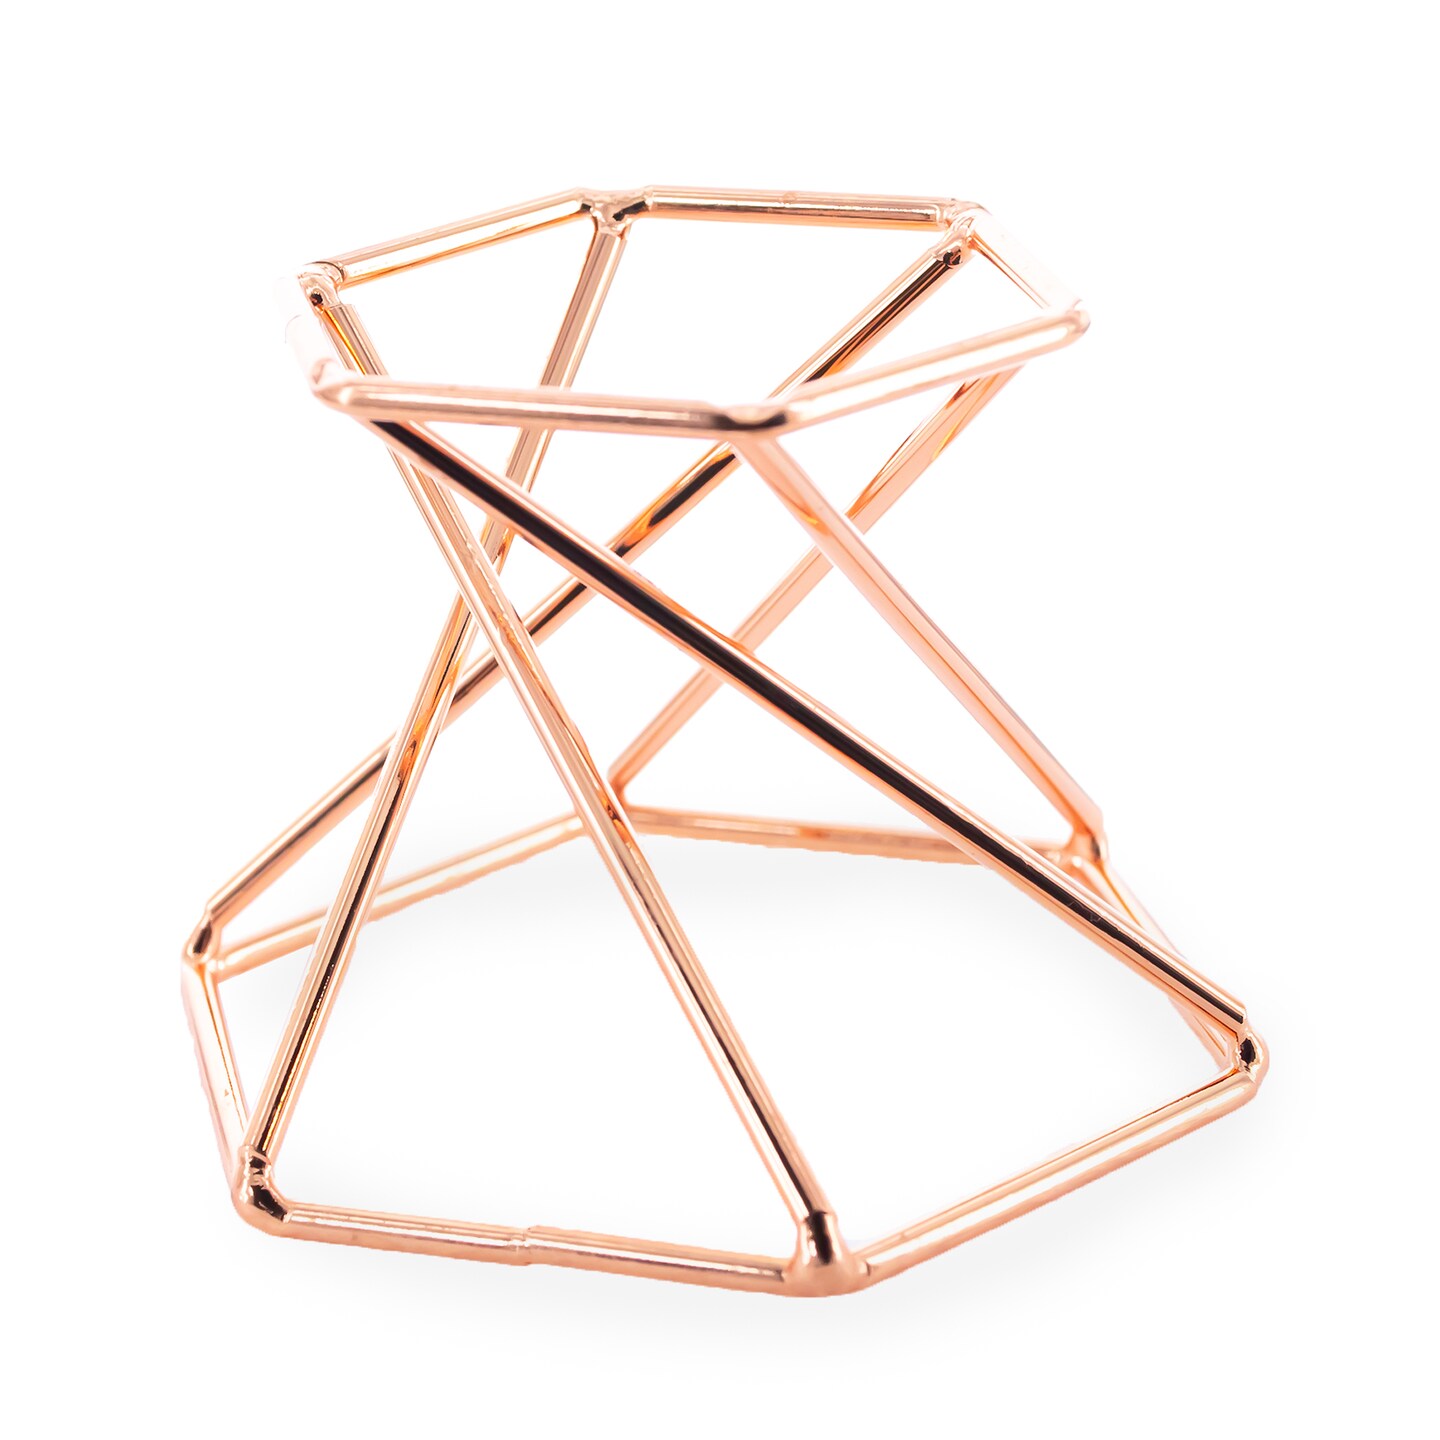 Hexagon Rose Gold Tone Metal Chicken and Goose Egg Stand Holder Display